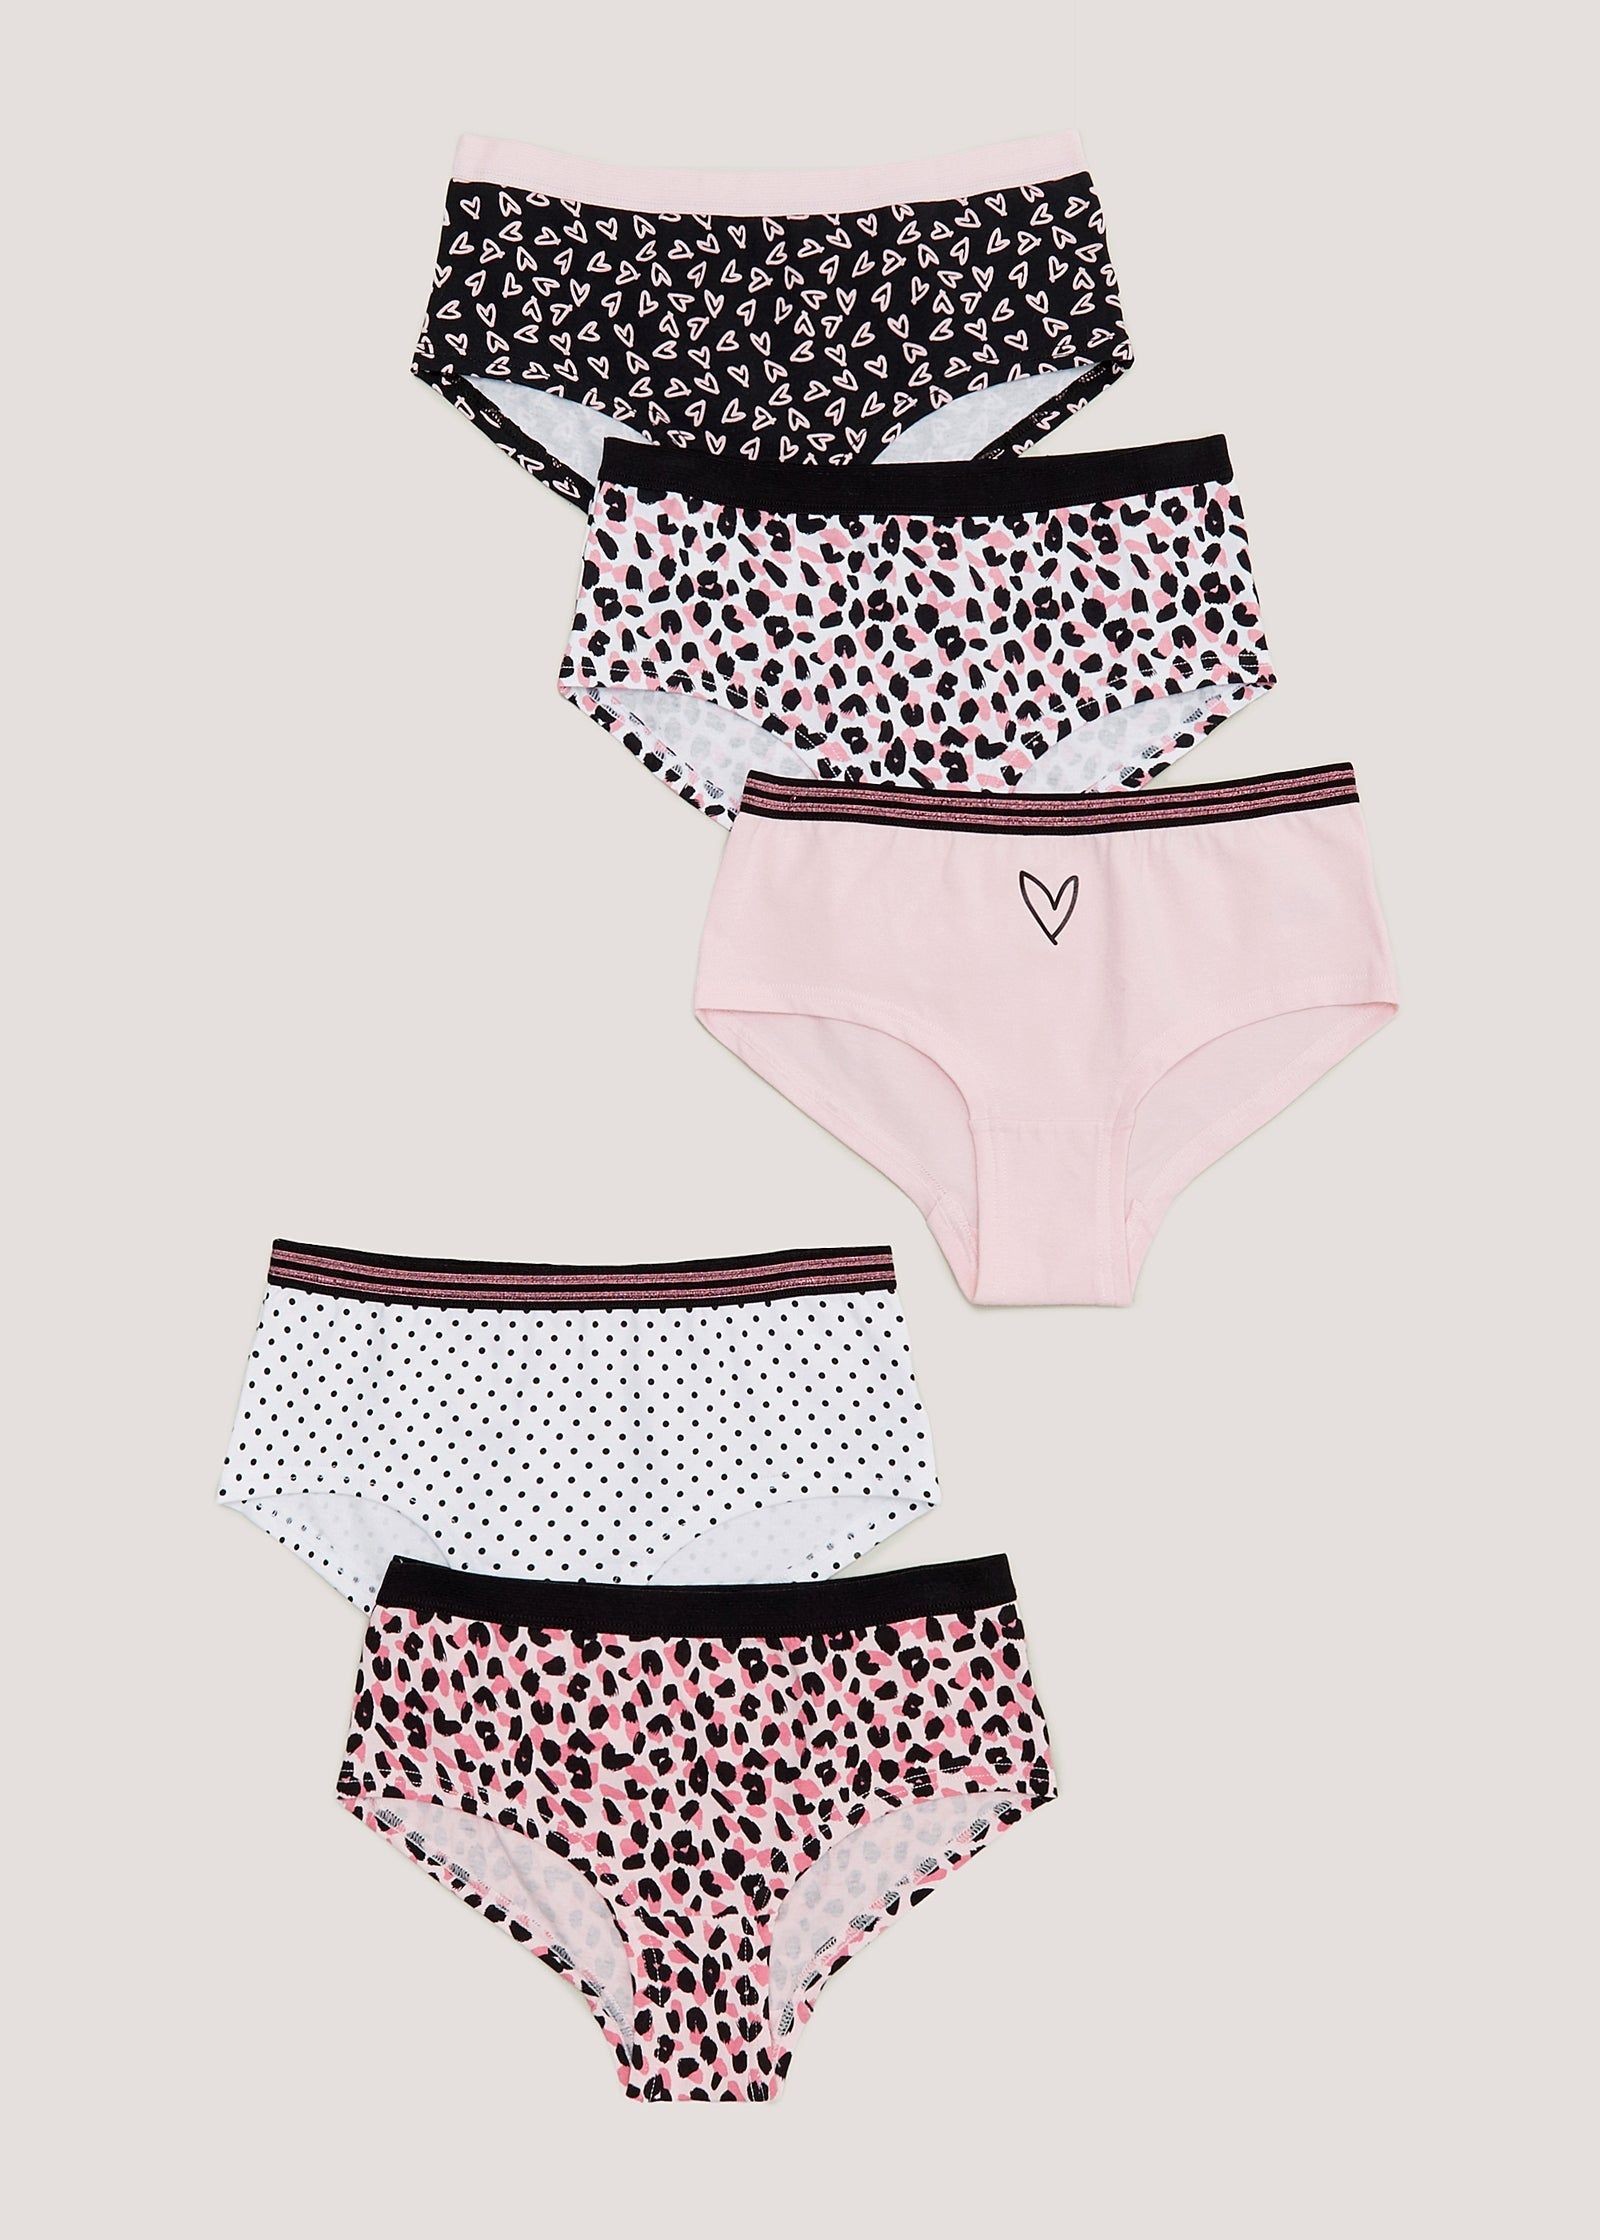 Buy Matalan Girls 5 Pack Heart Hipster Short Knickers (6-13yrs) in